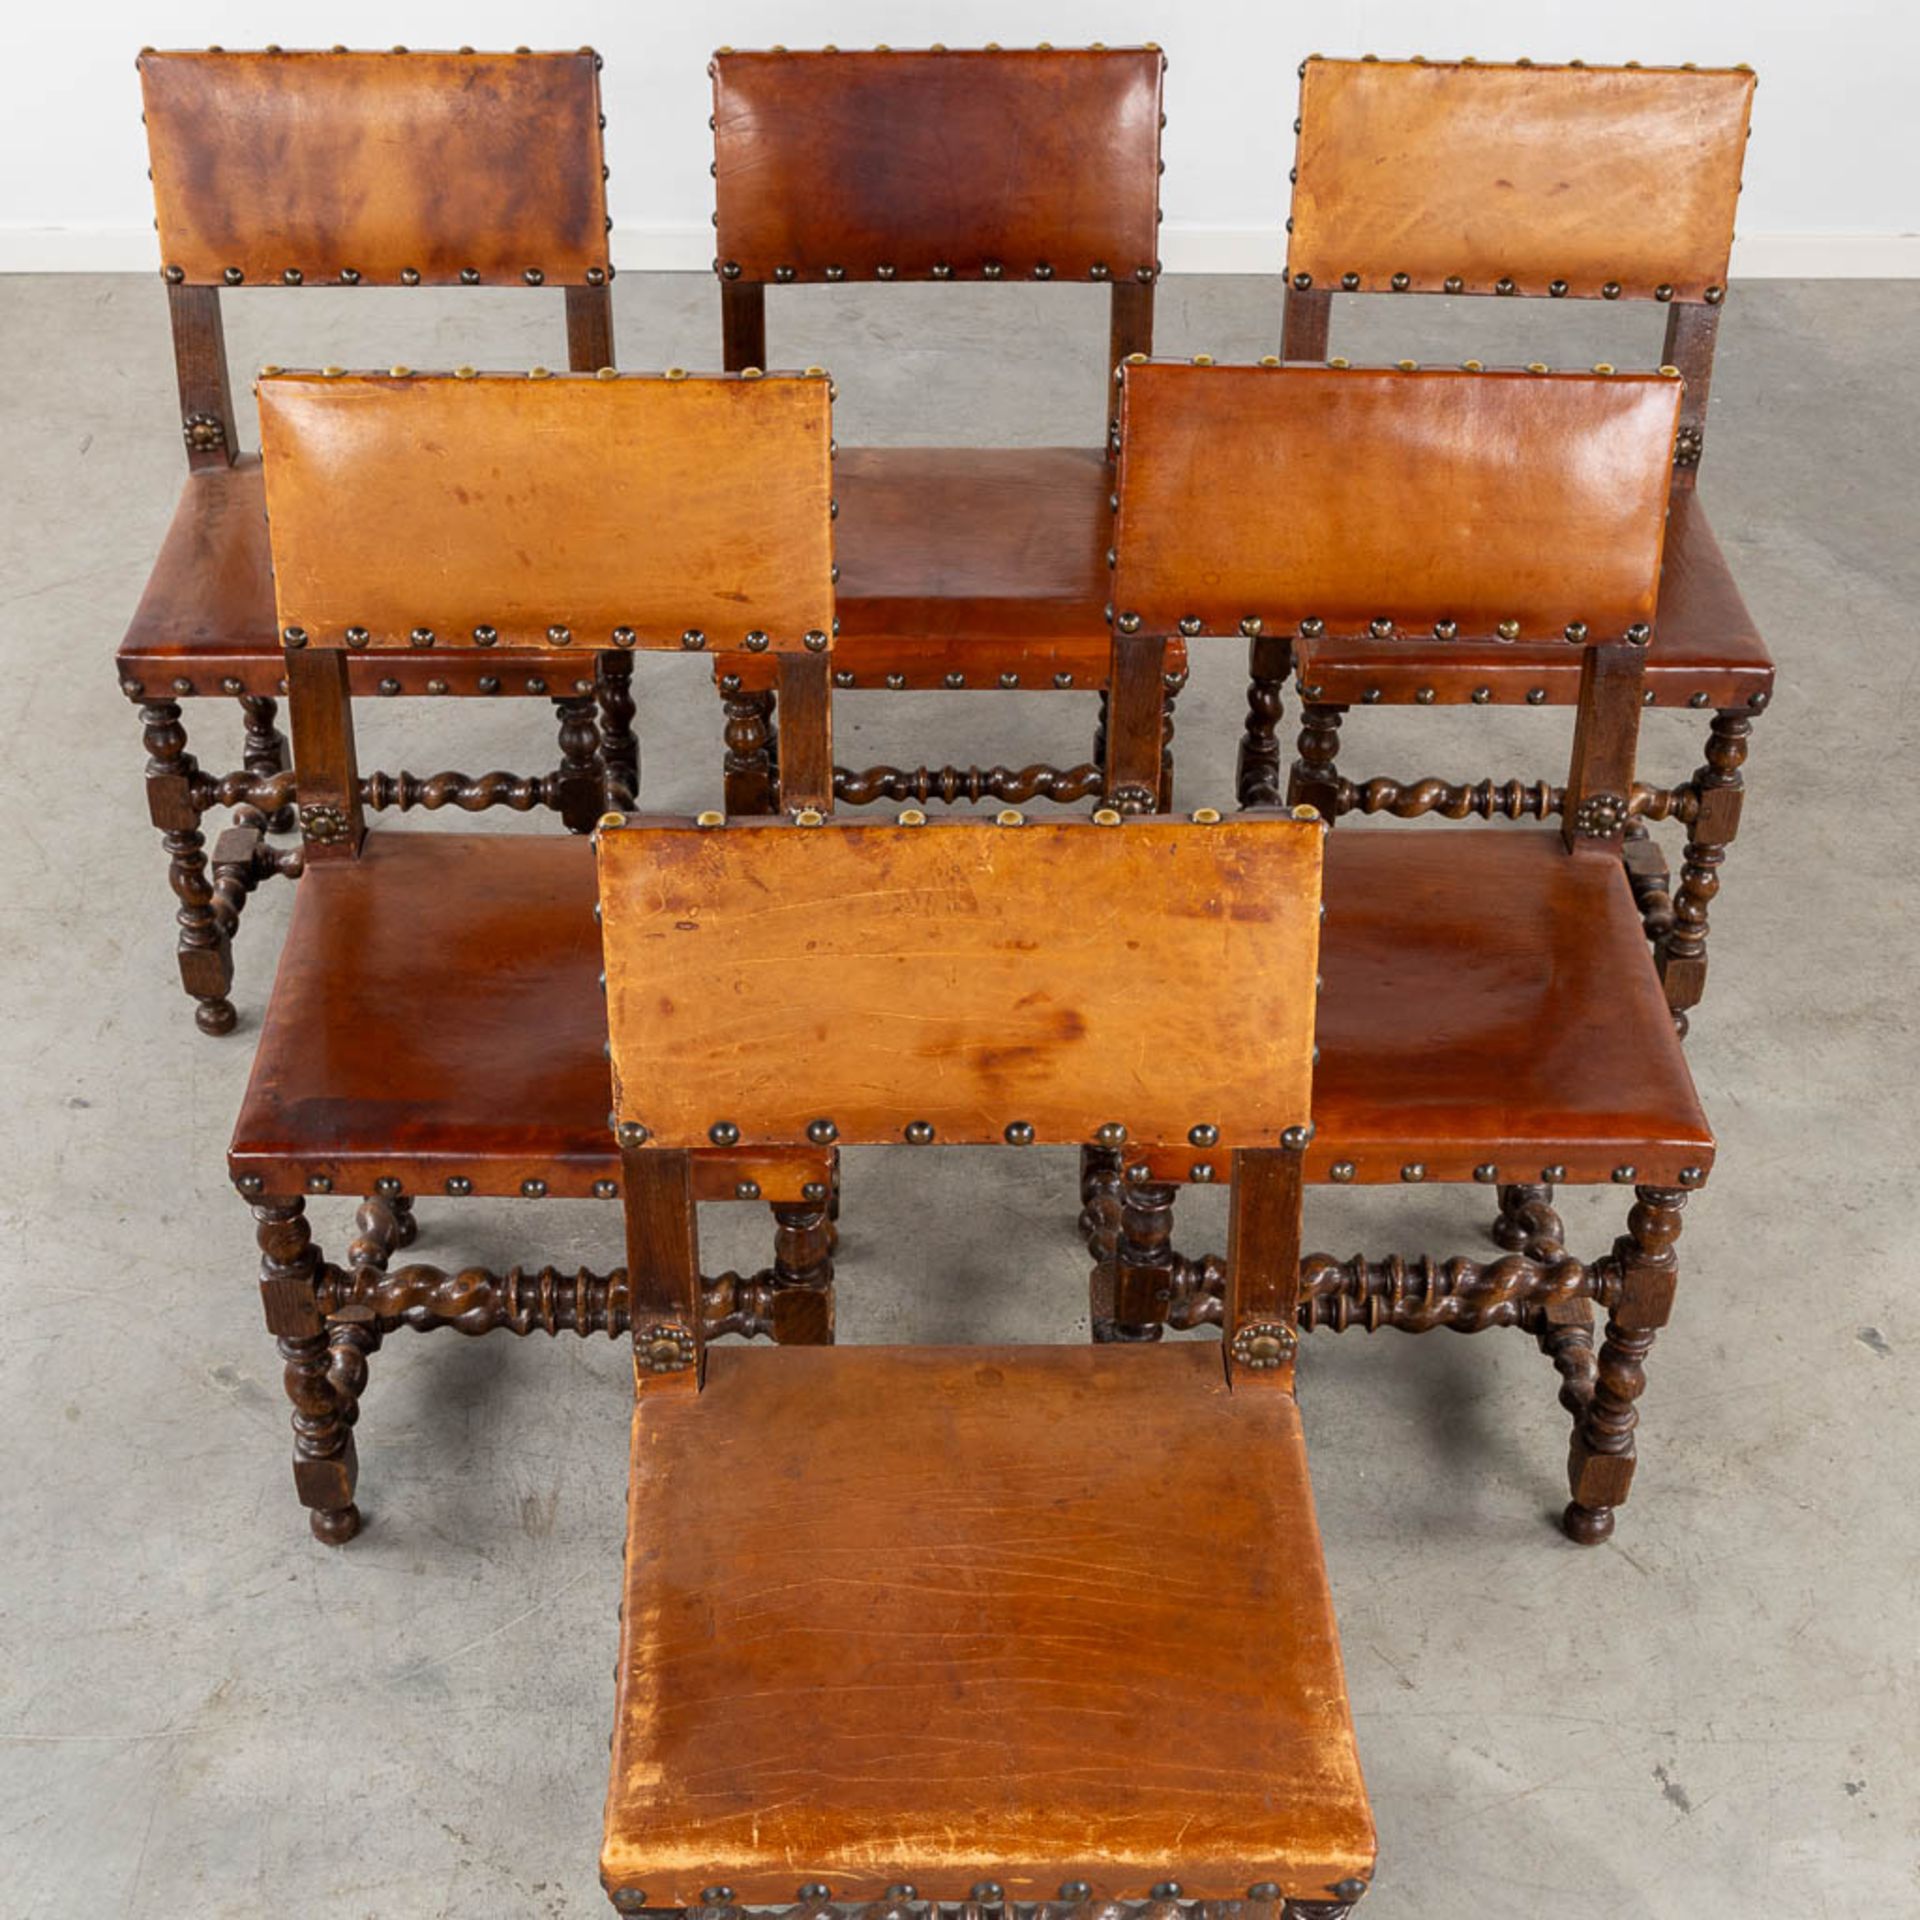 A matching set of 6 chairs, wood and leather. (L:47 x W:45 x H:90 cm) - Bild 3 aus 12